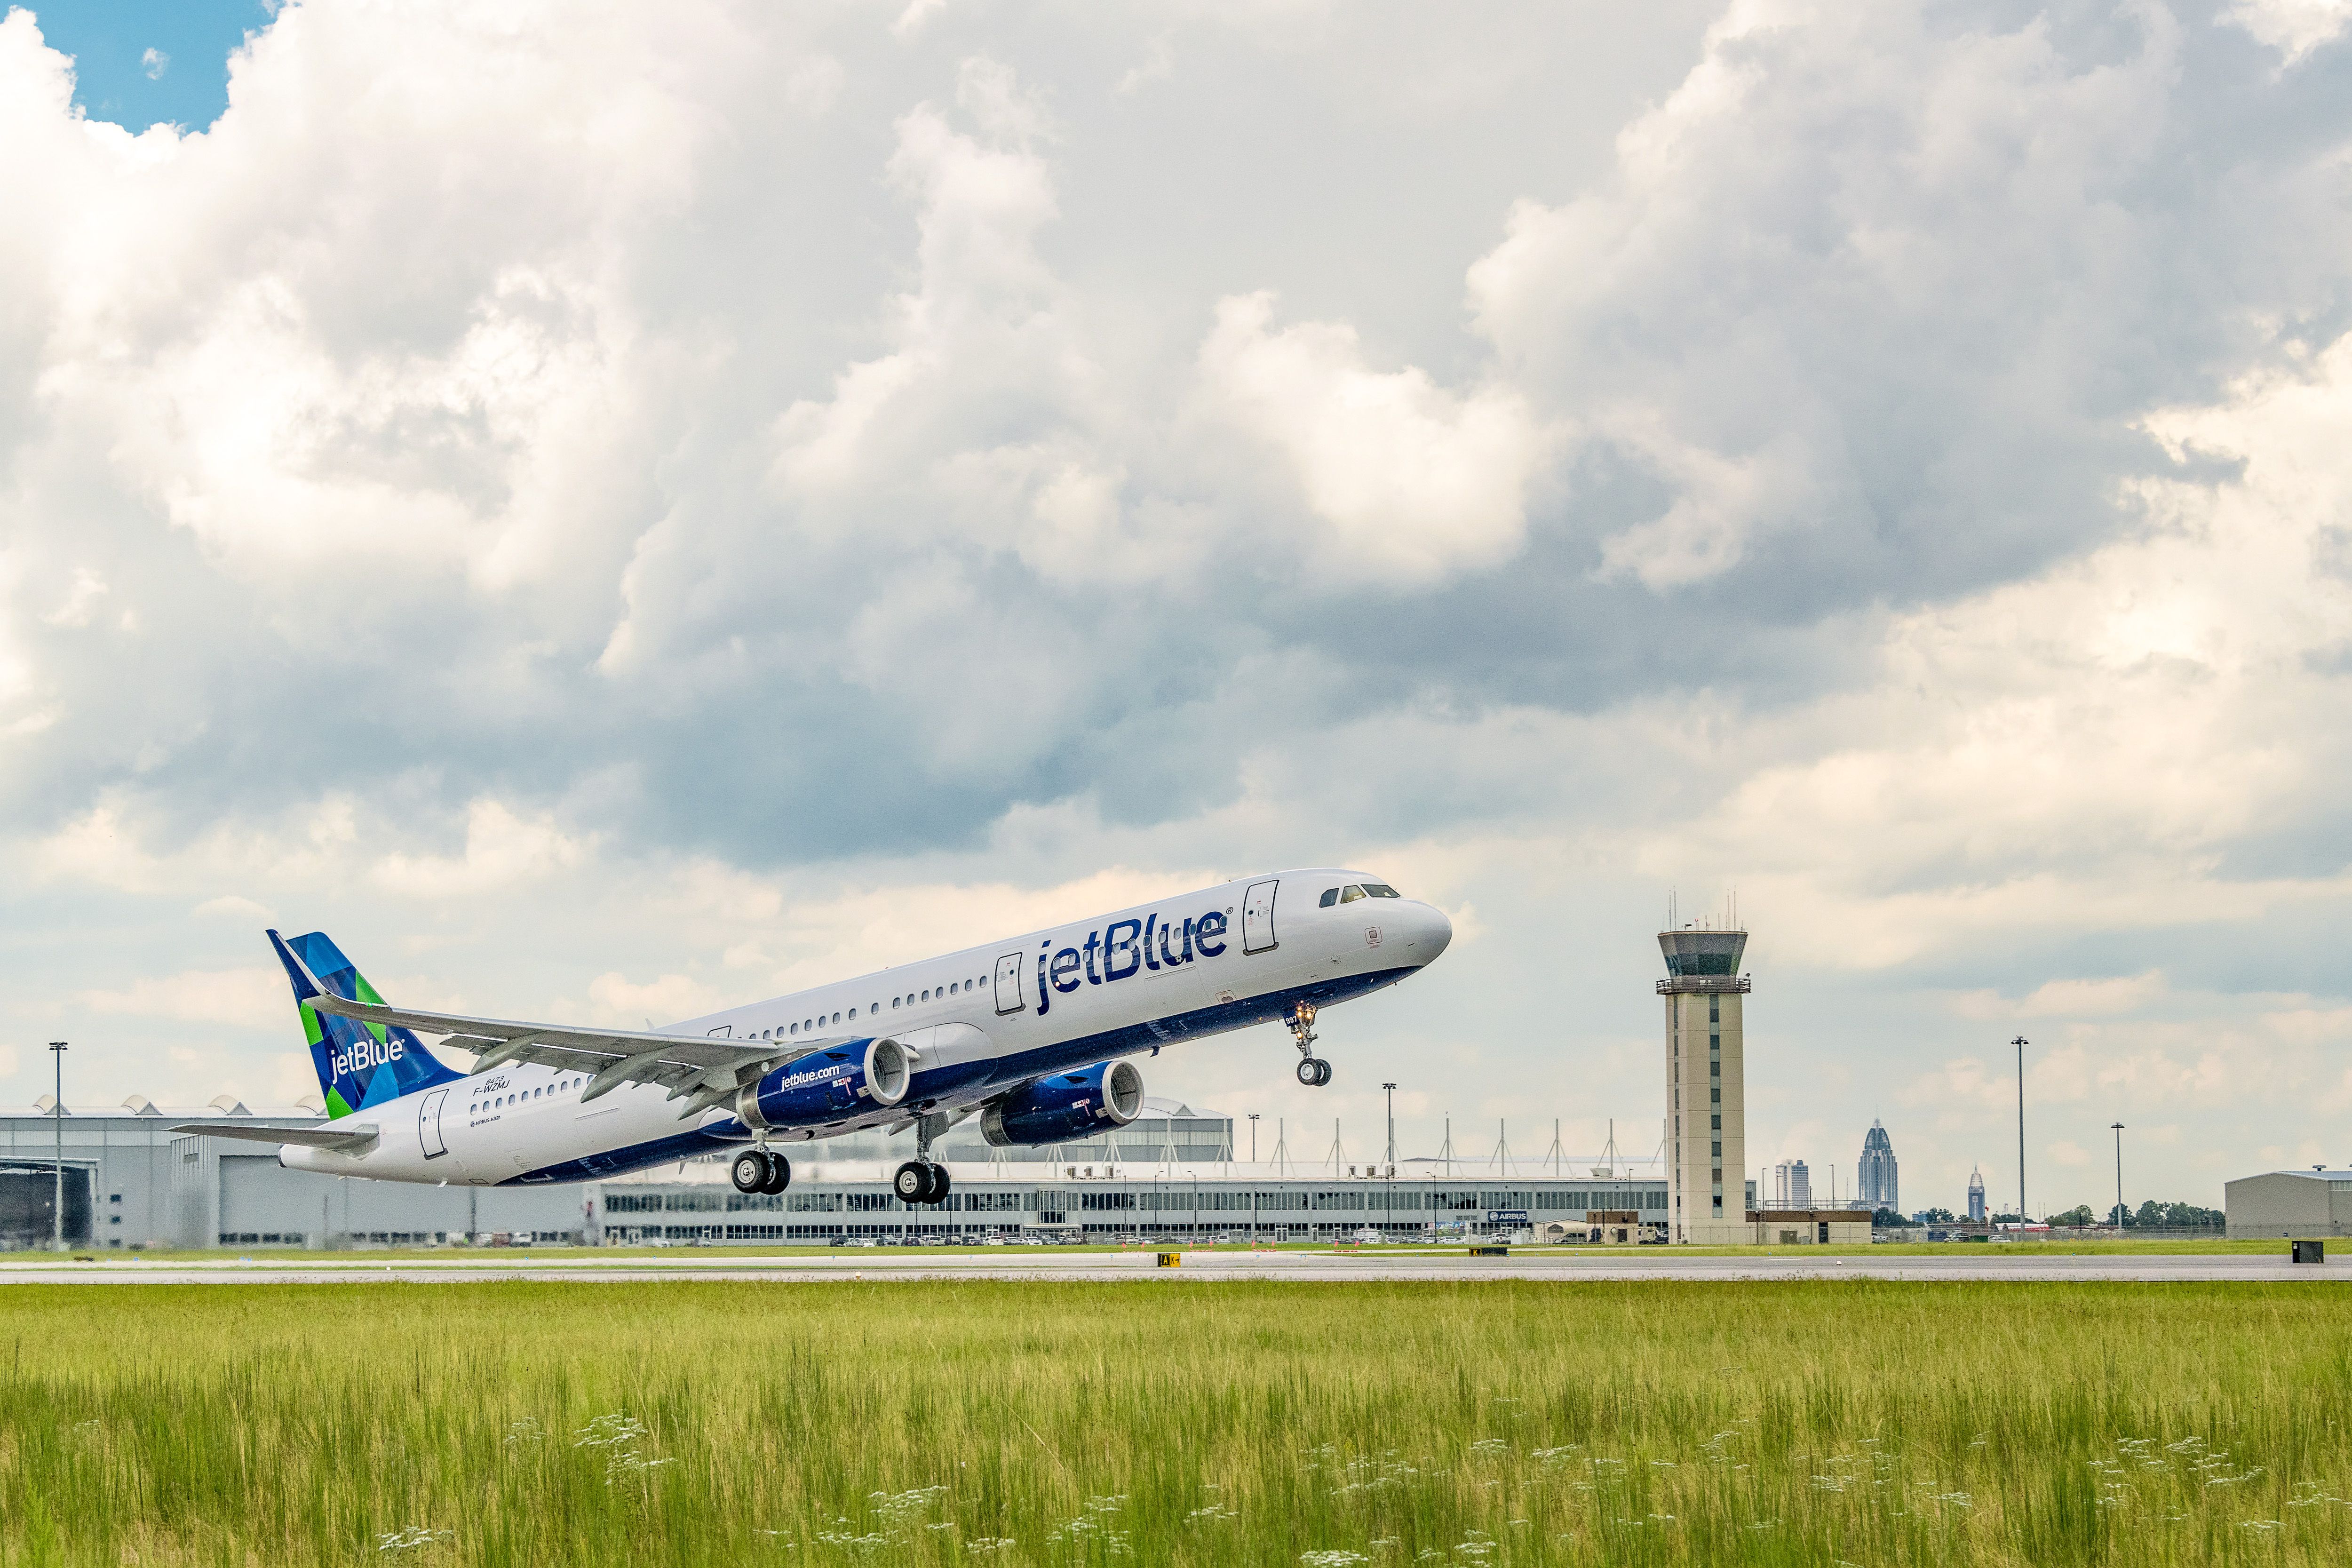 A JetBlue Airbus A321 takes off